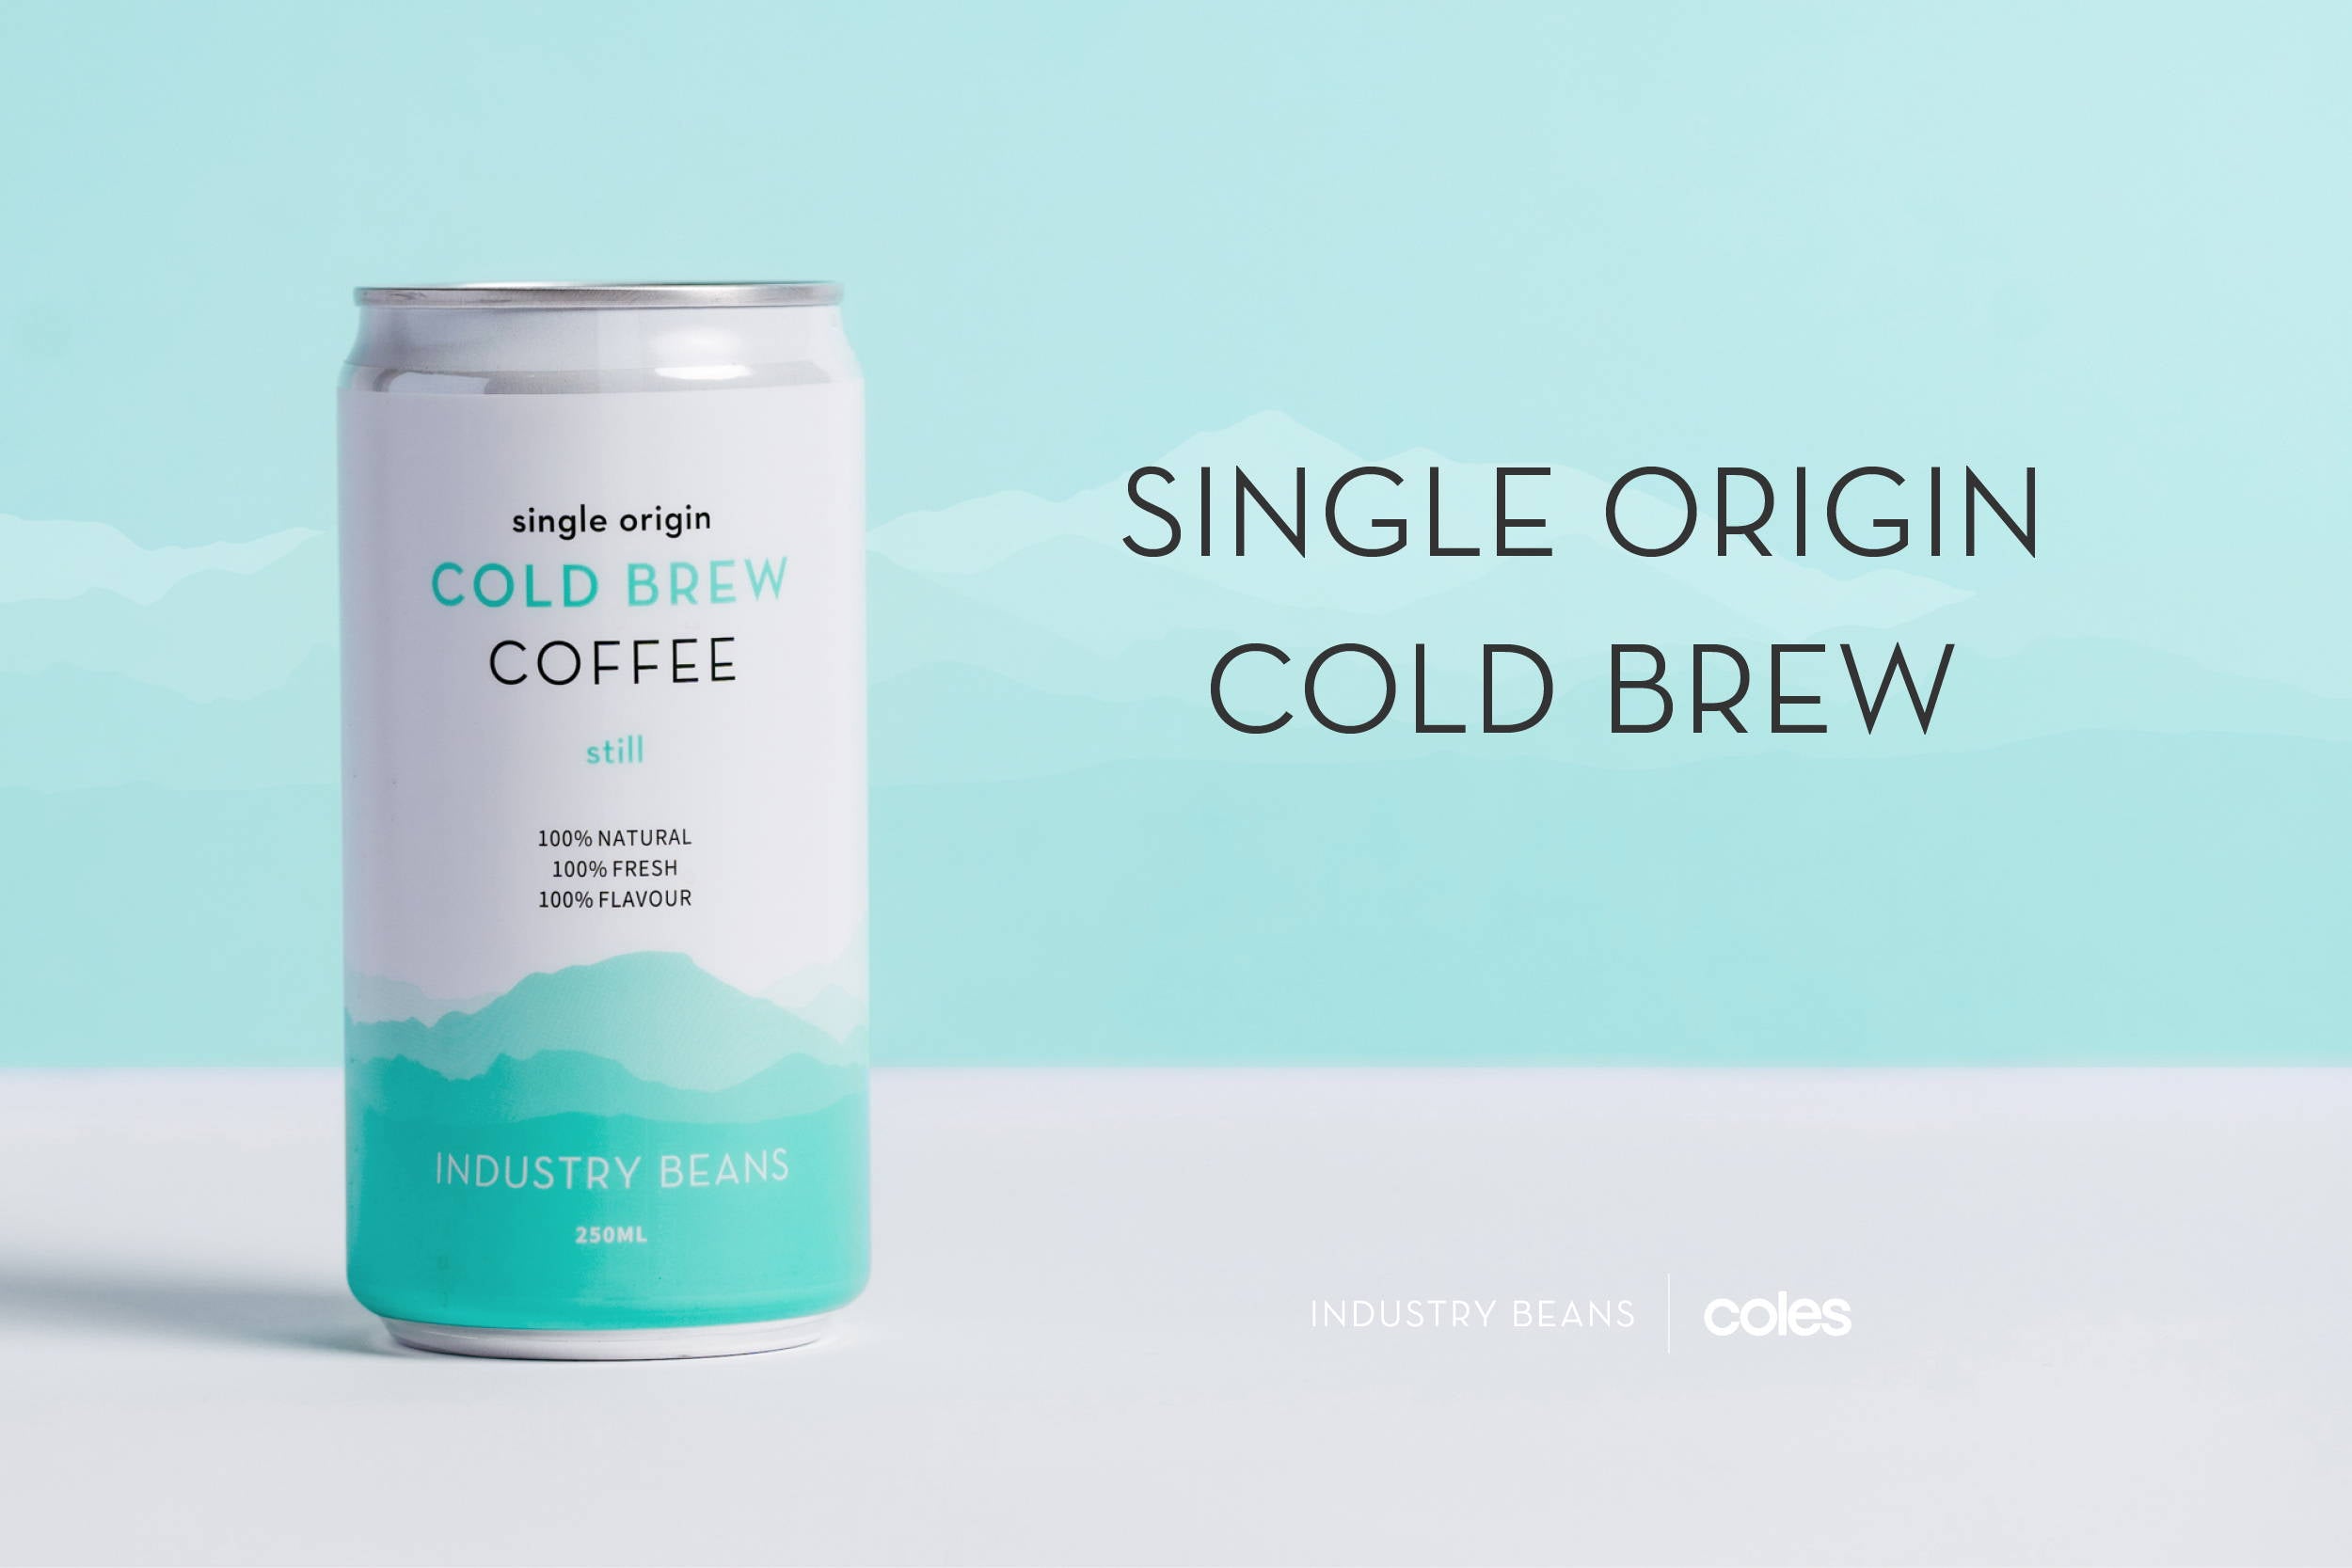 Our Cold Brew Coffee Just Landed In Coles!